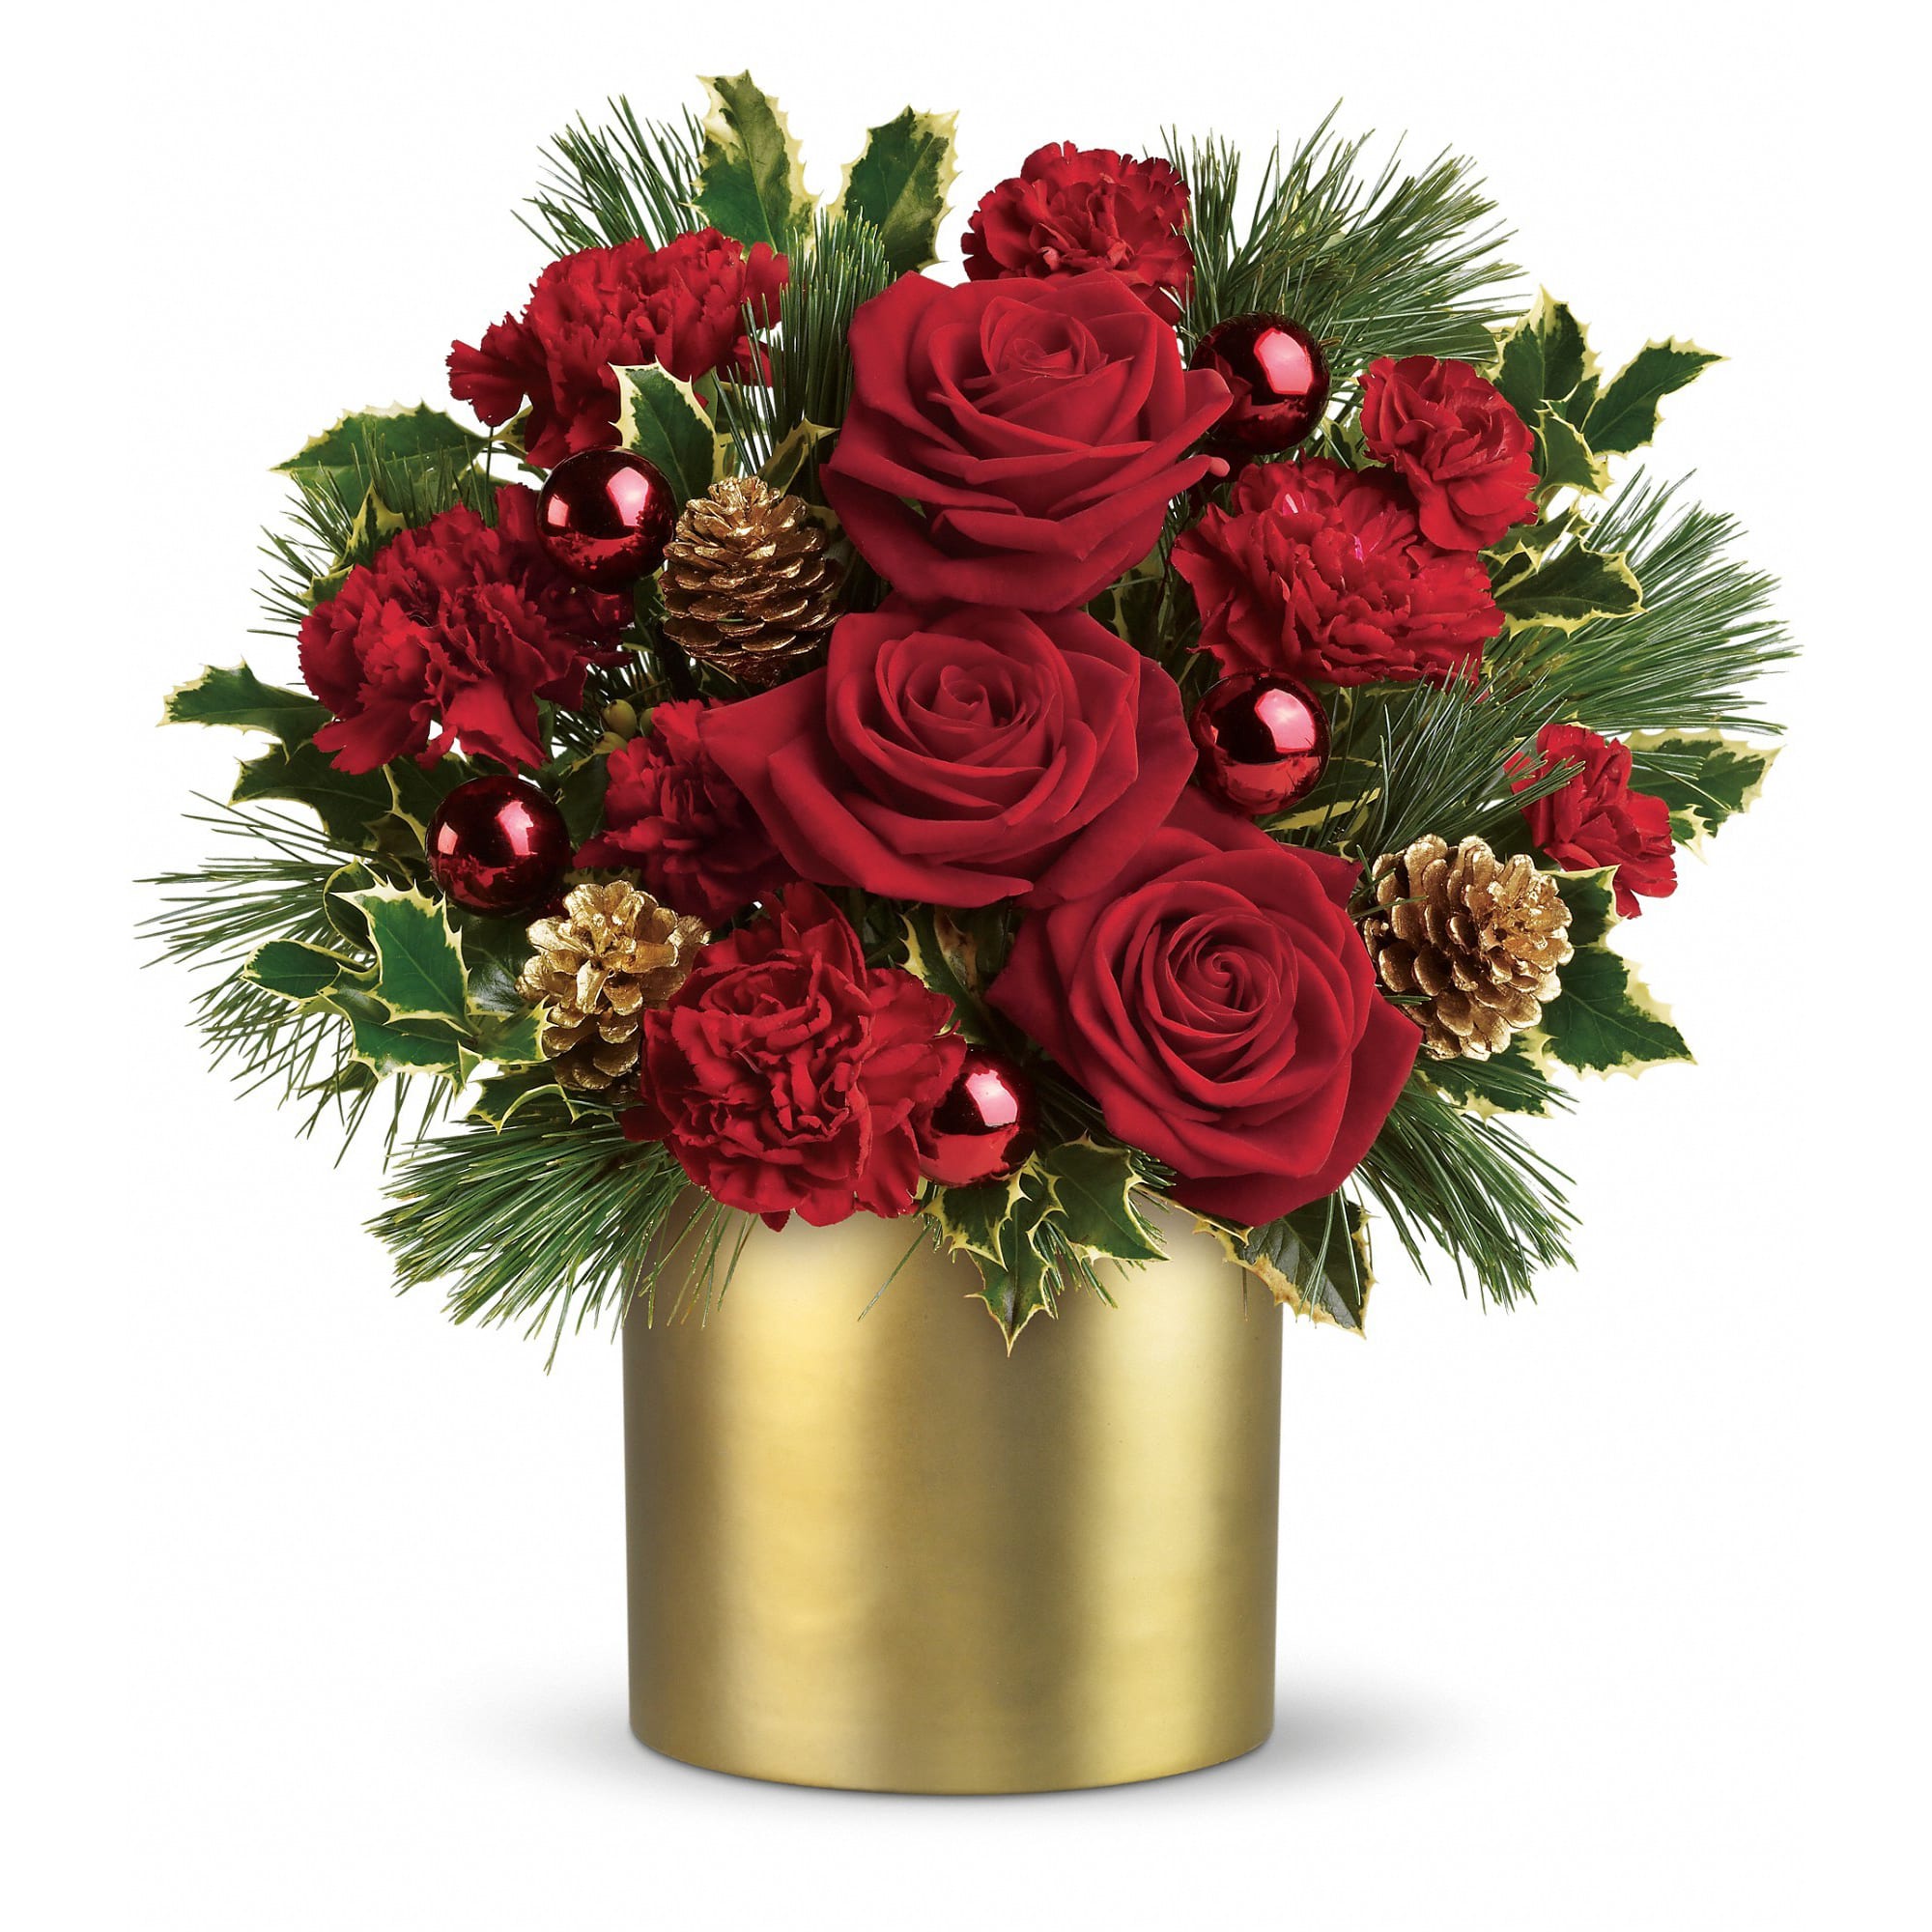 Teleflora's Holiday Elegance - Add a little Couture to Christmas this year! Your family and friends will think you're golden when you send them this stylish holiday arrangement.    Stunning red roses and carnations, holly, pinecones and shiny red ornament balls are perfectly arranged in a satiny gold cylinder vase . It's a 24-karat gift!    Approximately 13 1/2&quot; W x 14 1/2&quot; H    Orientation: One-Sided    As Shown : T115-1A  Deluxe : T115-1B  Premium : T115-1C